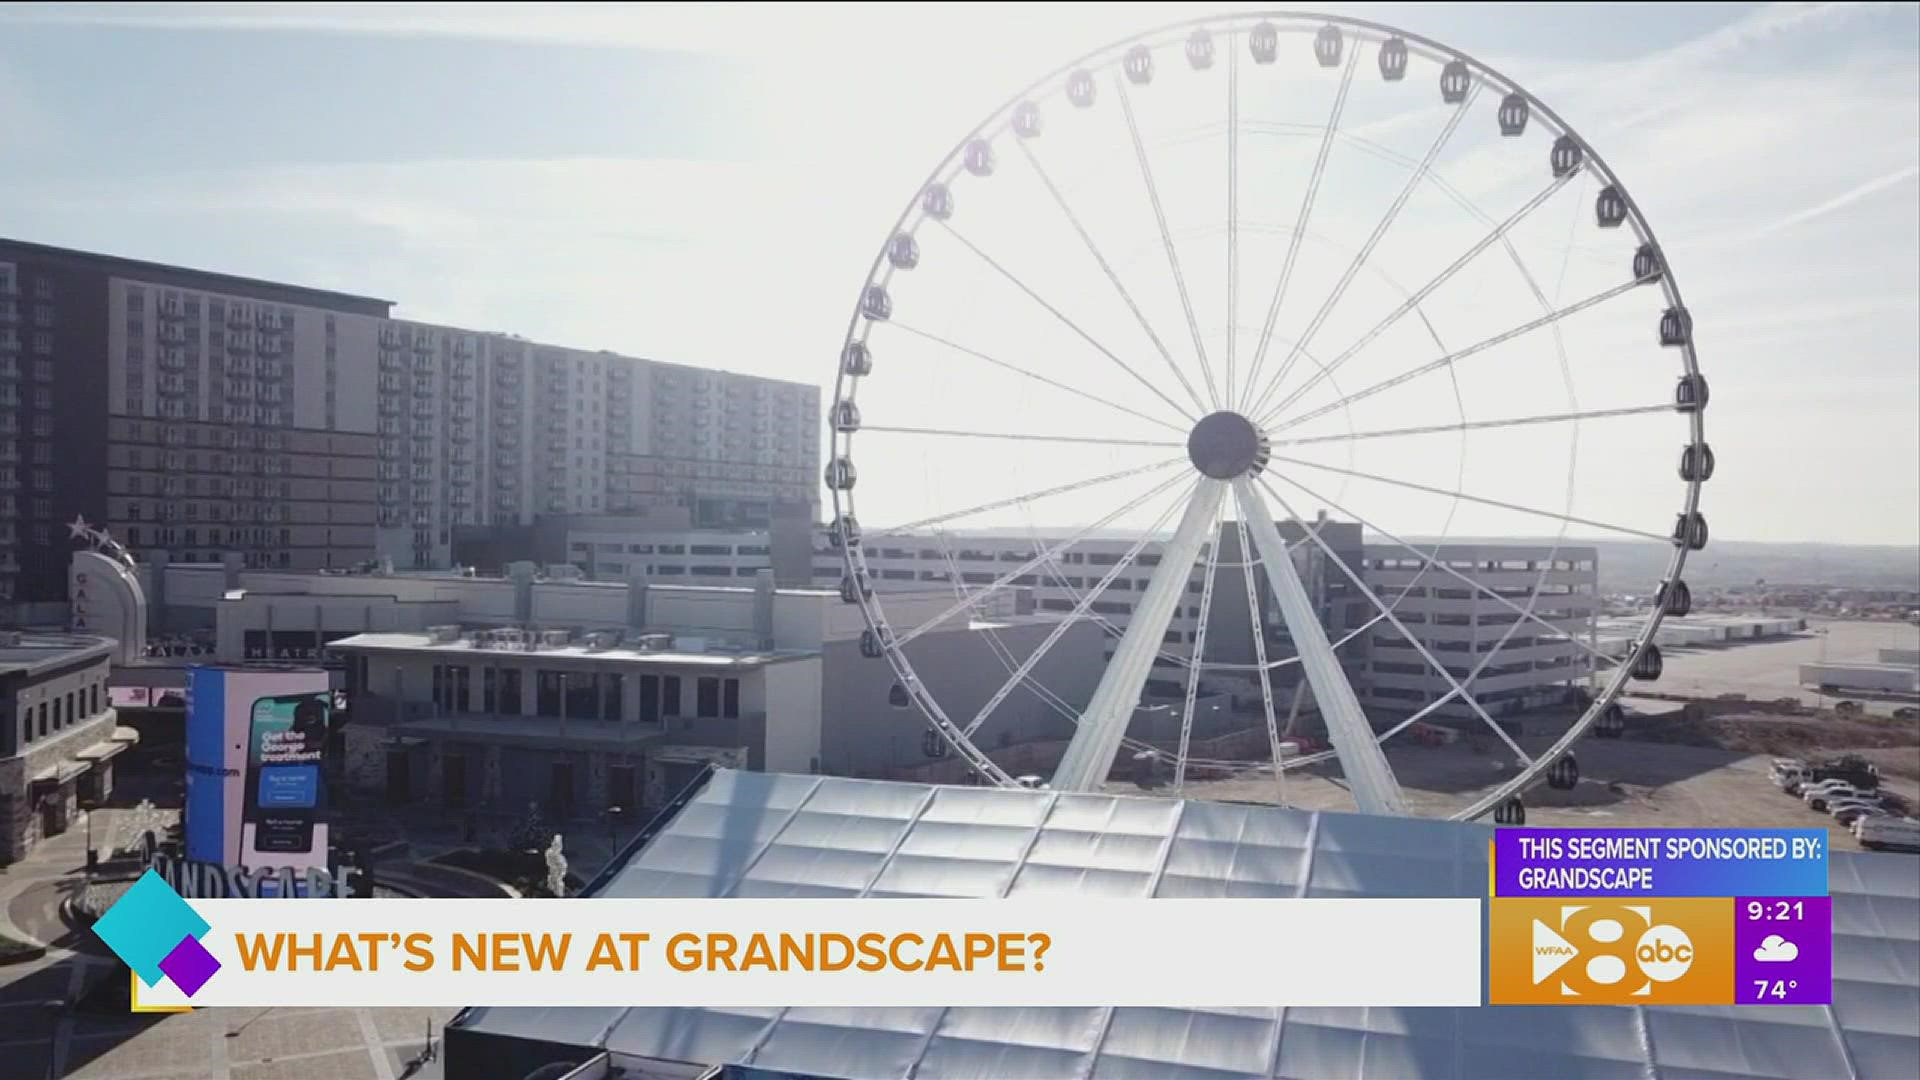 This segment is sponsored by Grandscape.